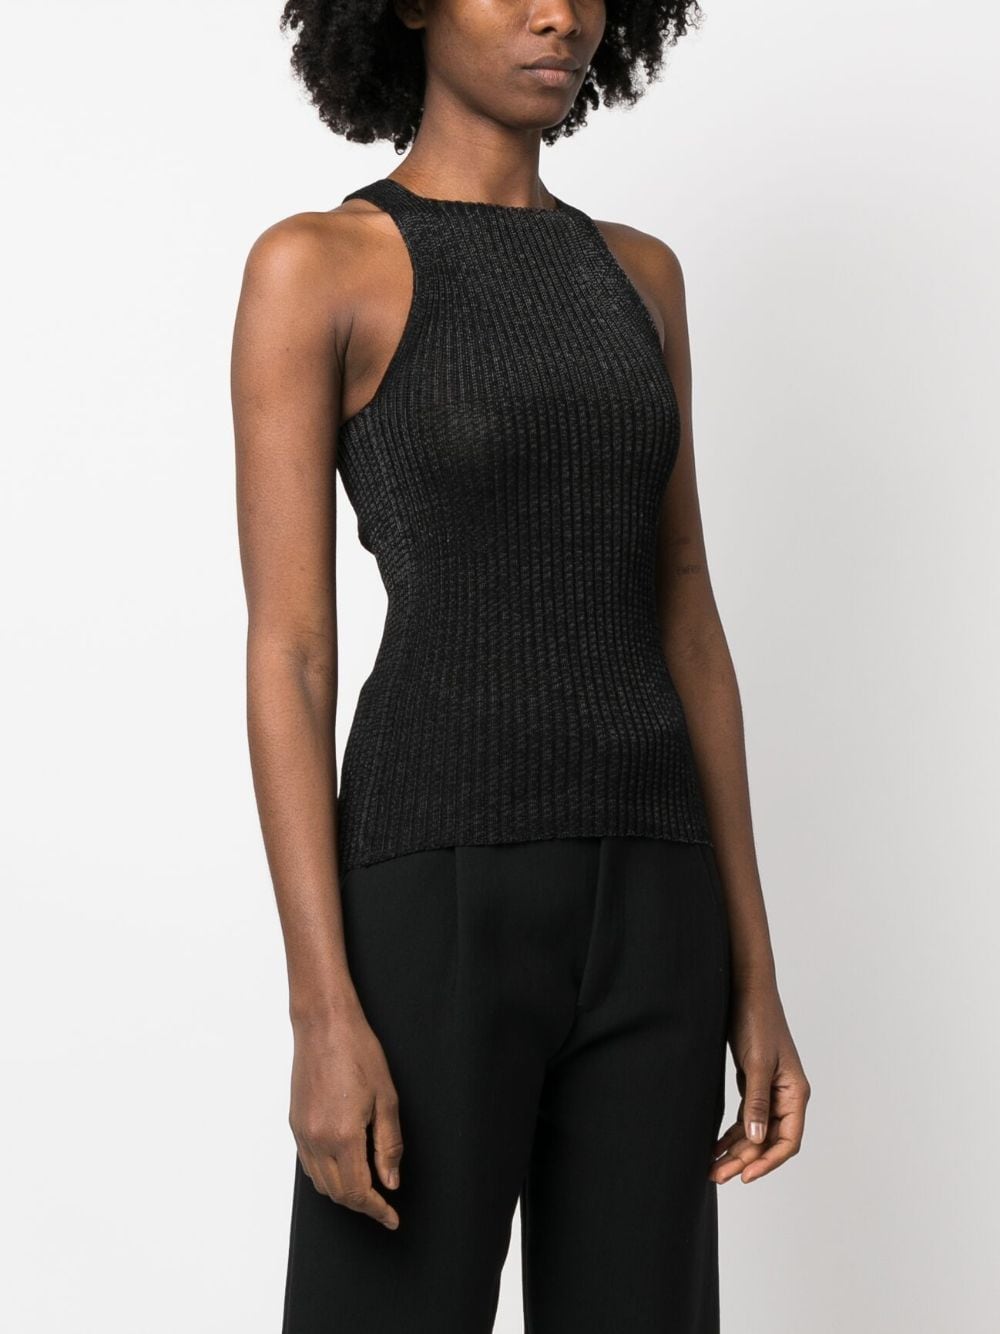 A. ROEGE HOVE Emma high-neck Ribbed Tank Top - Farfetch